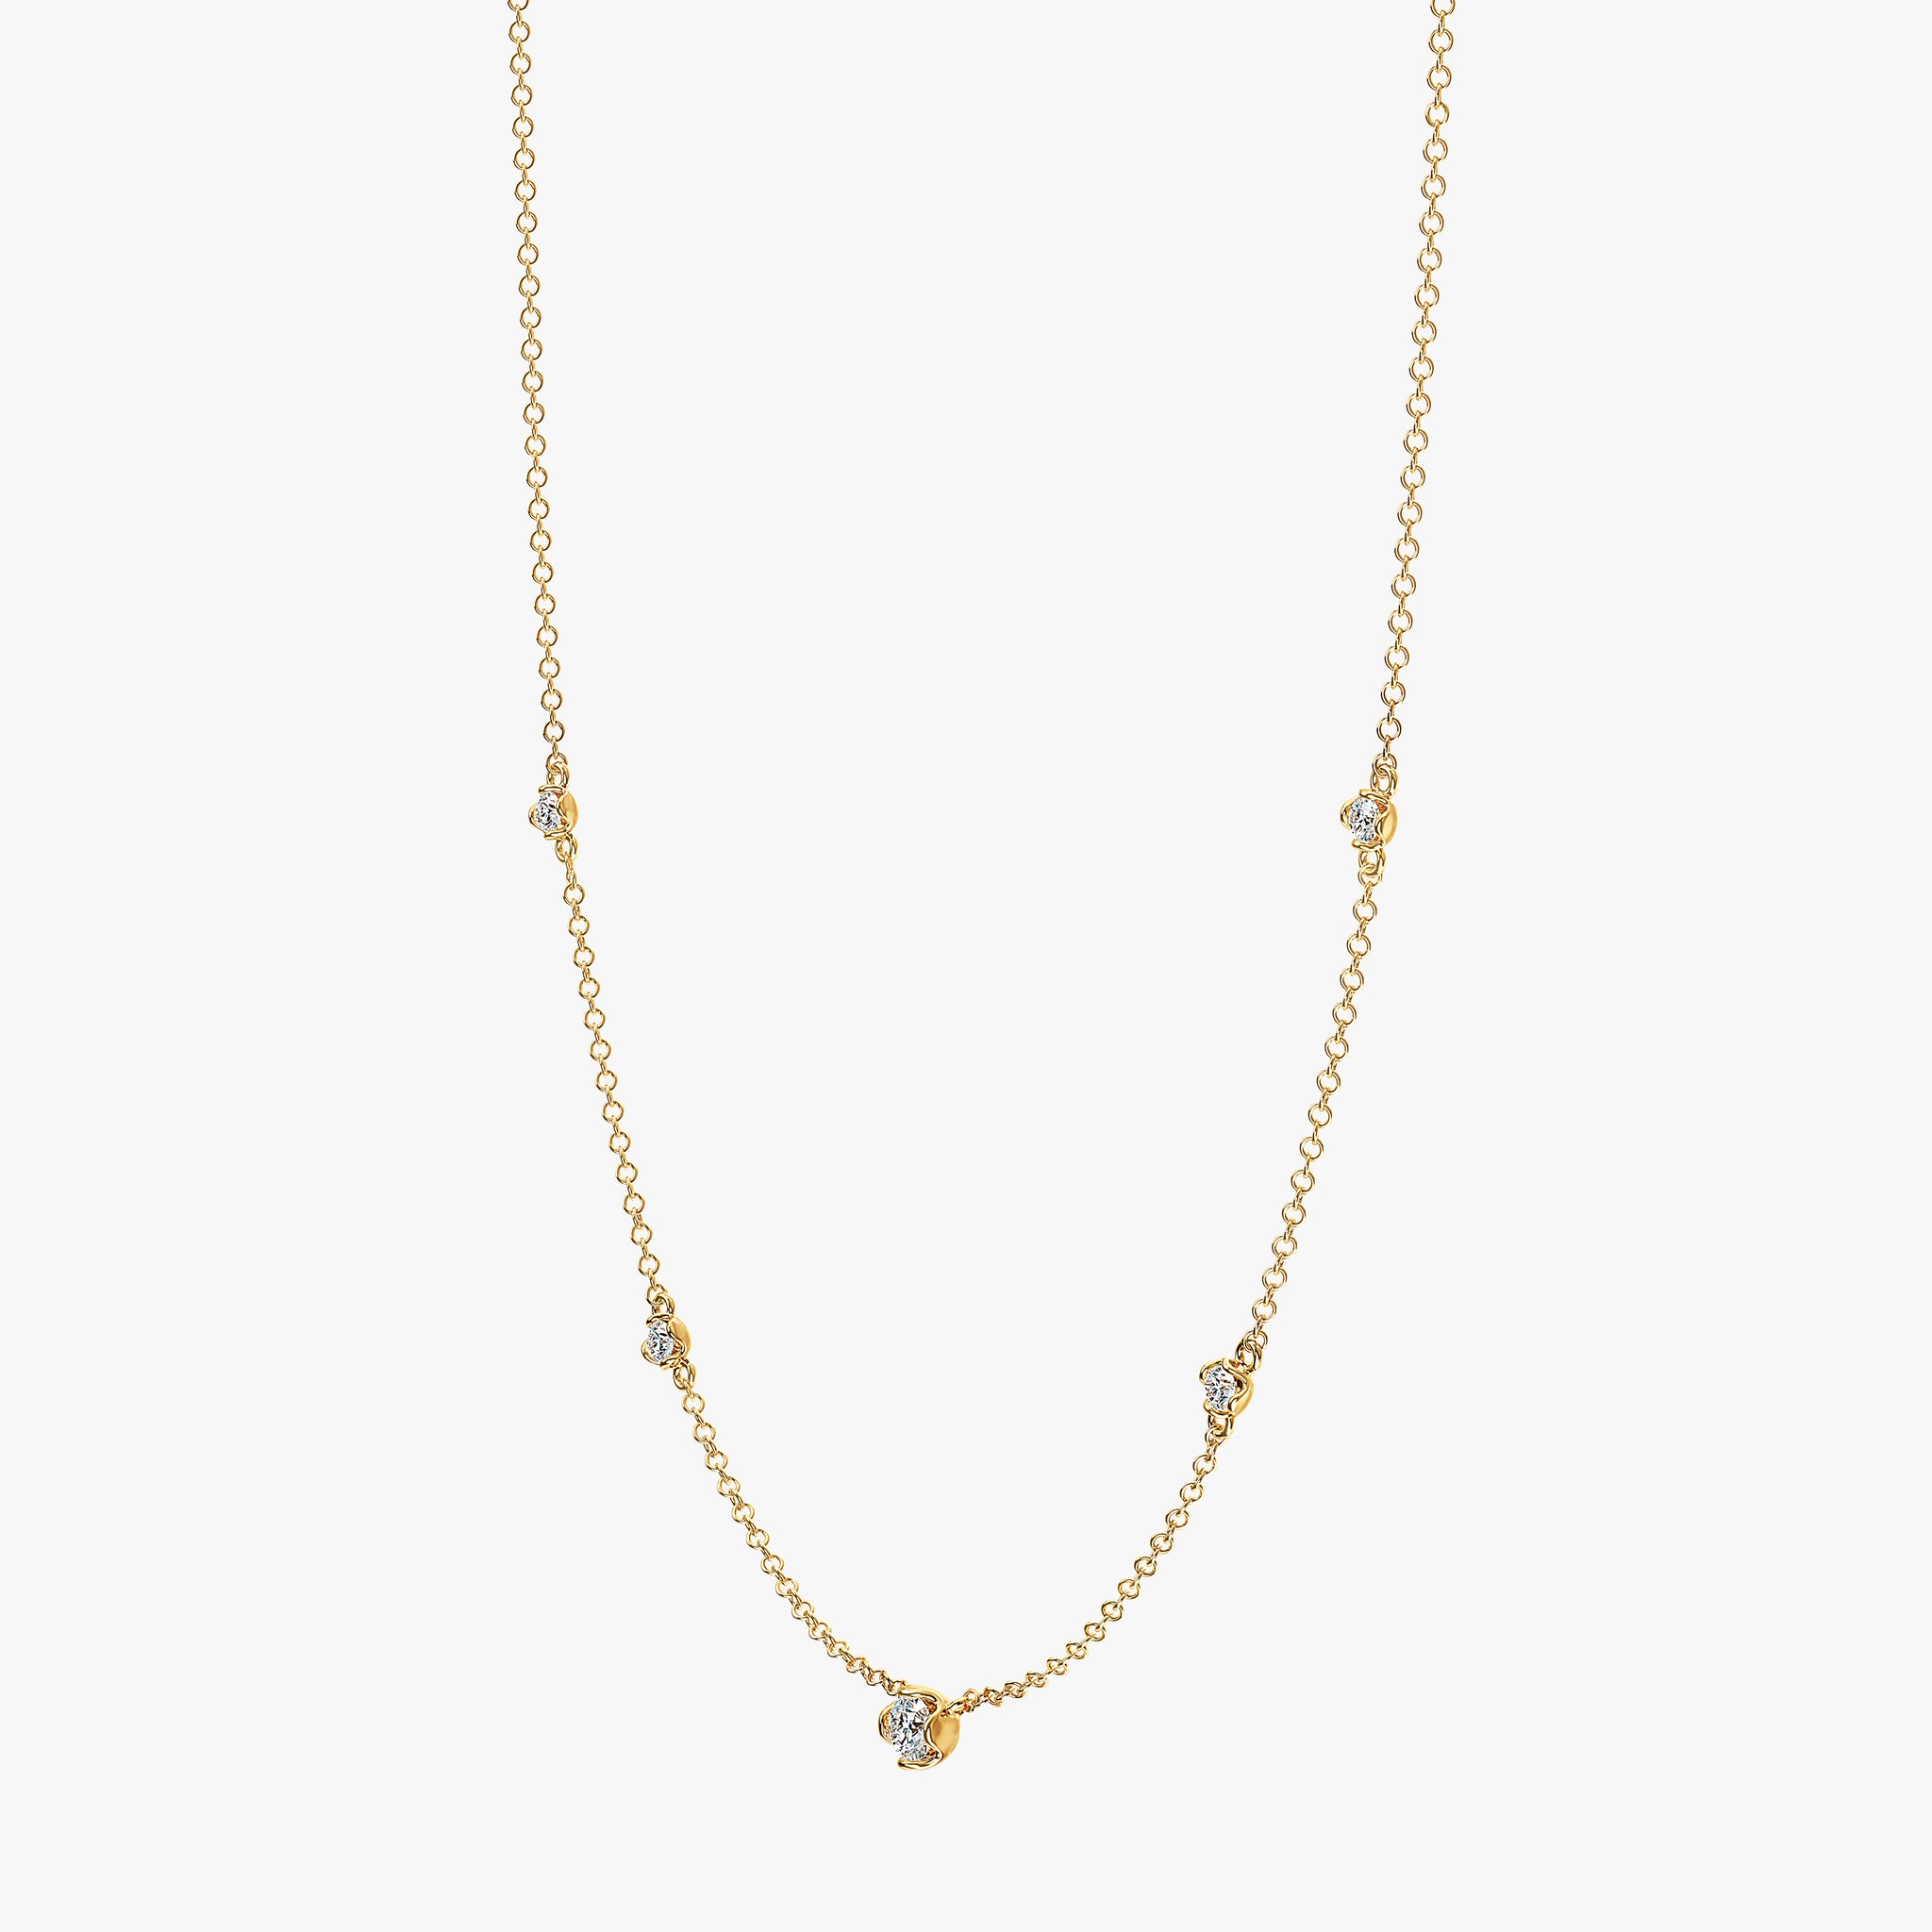 J'EVAR 14KT Yellow Gold By The Yard ALTR Lab Grown Diamond Necklace Perspective View | 0.35 CT